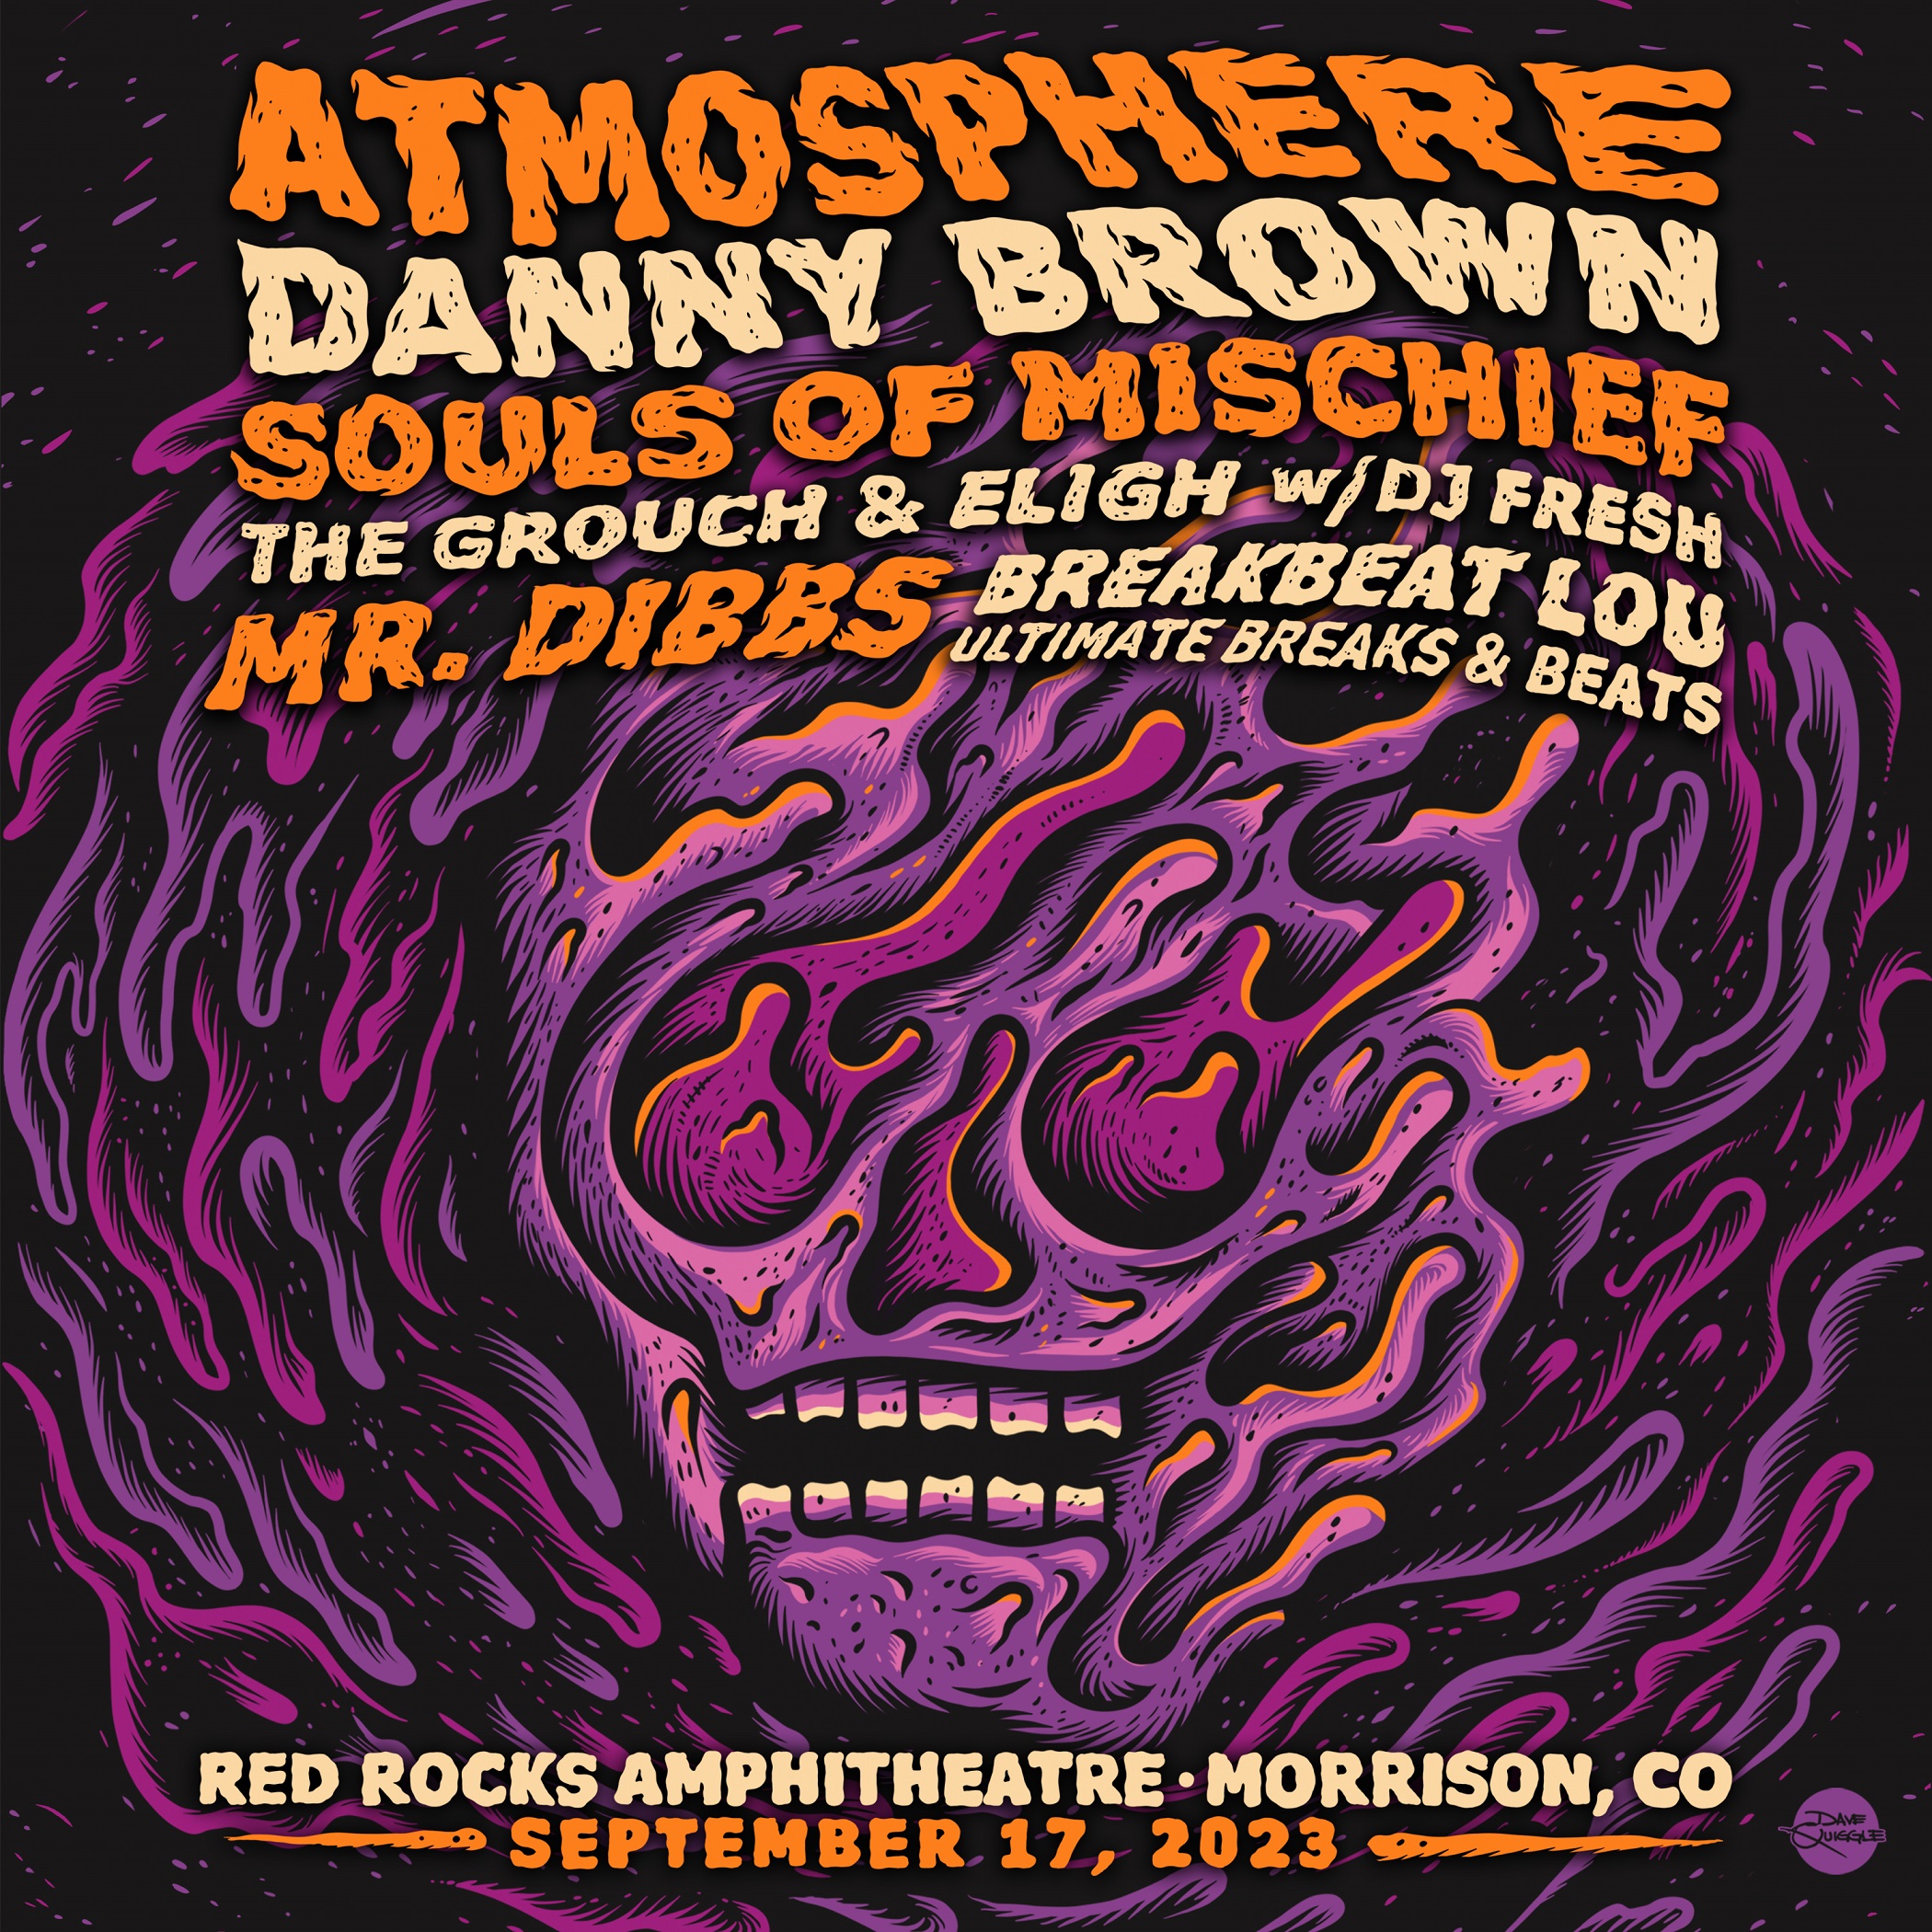 ATMOSPHERE live at Red Rocks Amphitheatre on Sunday, September 17, 2023